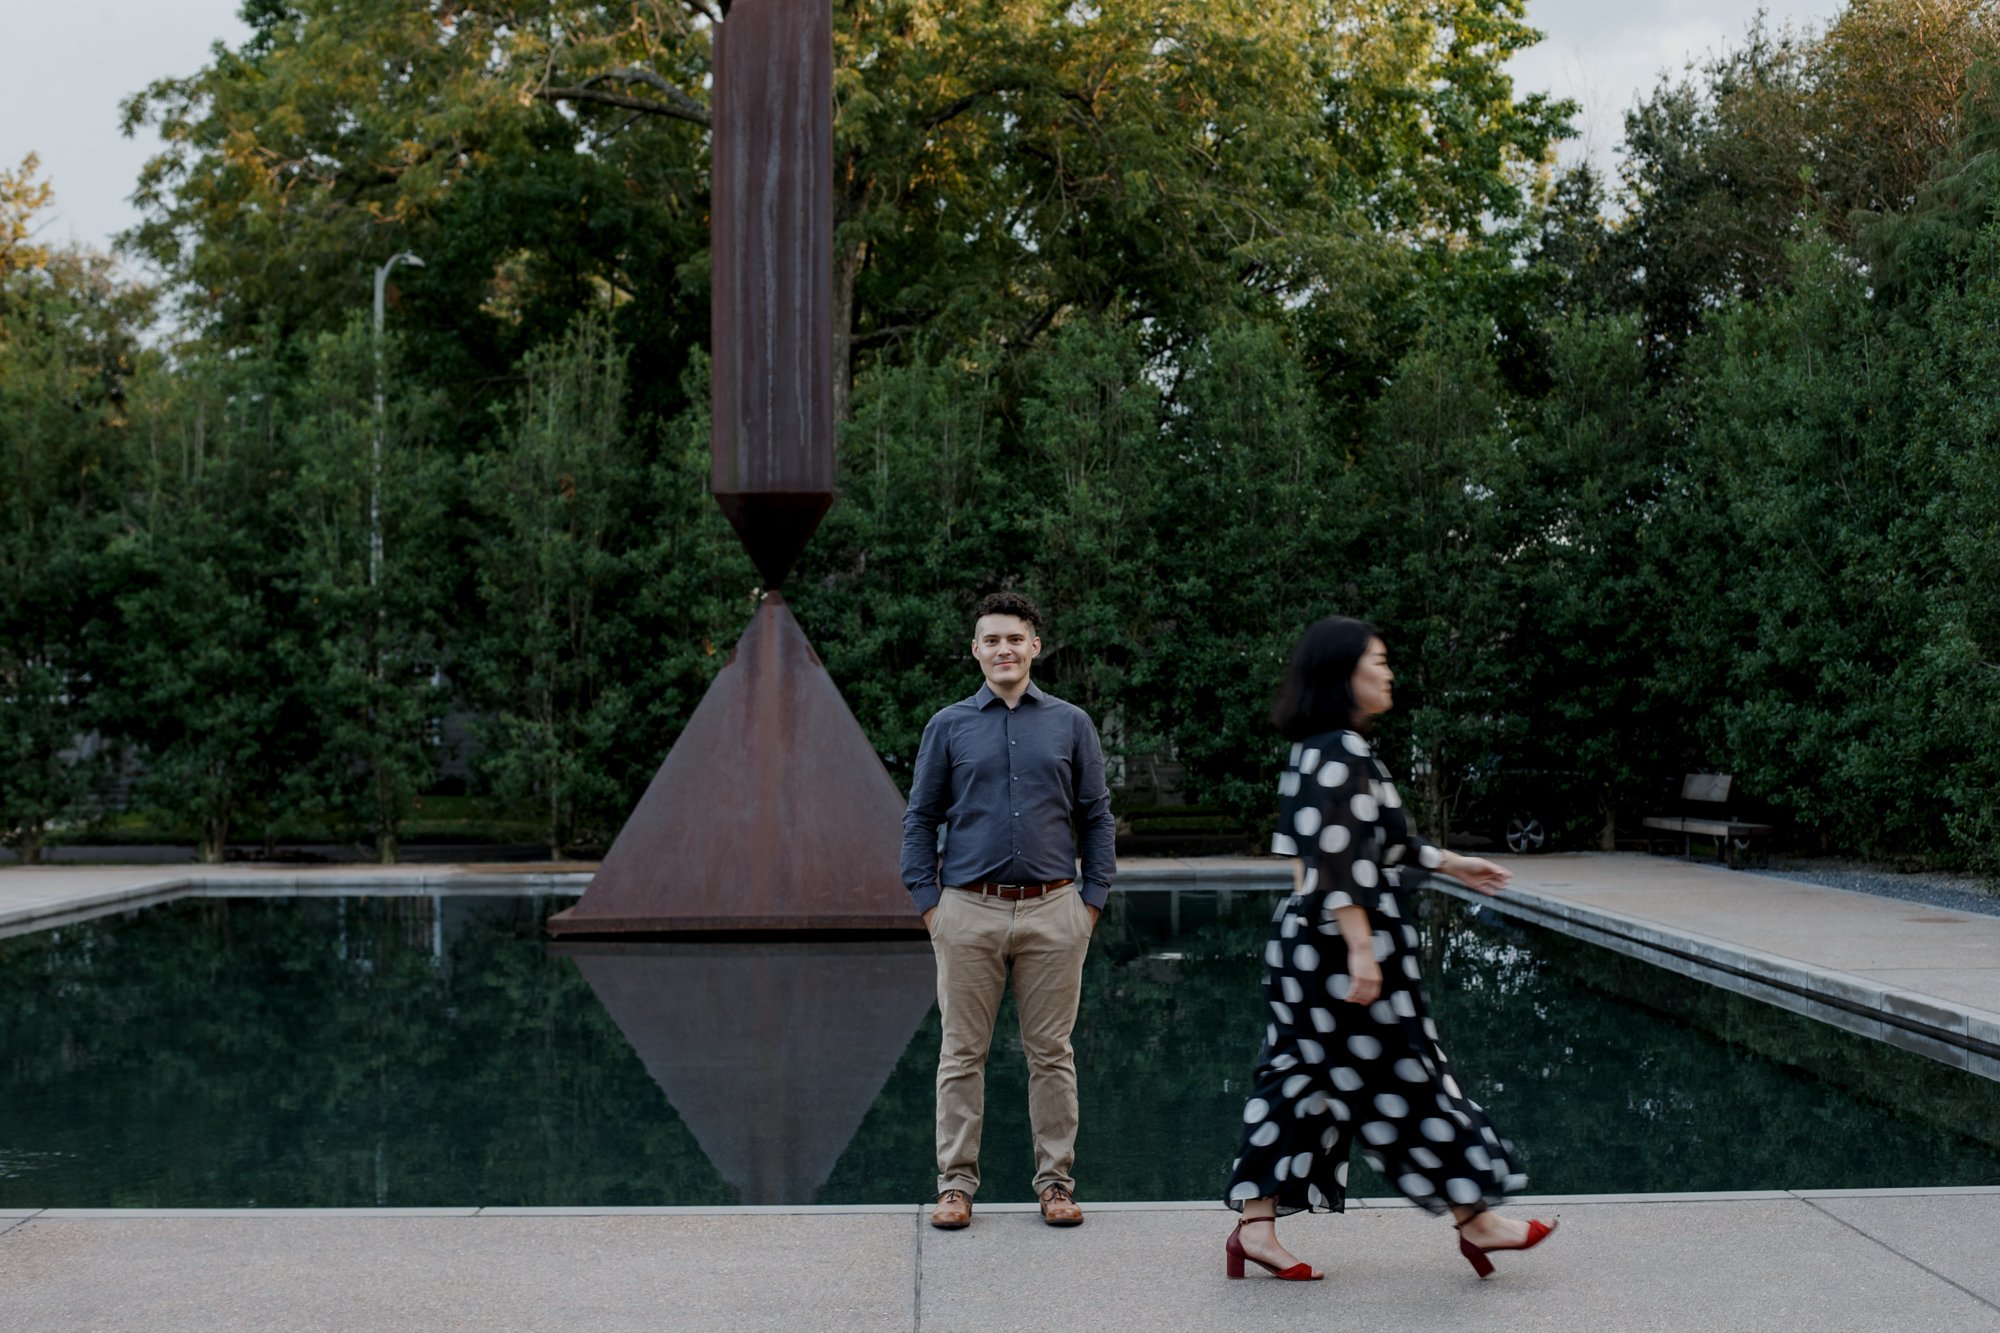 Ghosty photos - Stylish Polka Dot Dress Engagement Photo Session by Rothko Chapel Sculpture